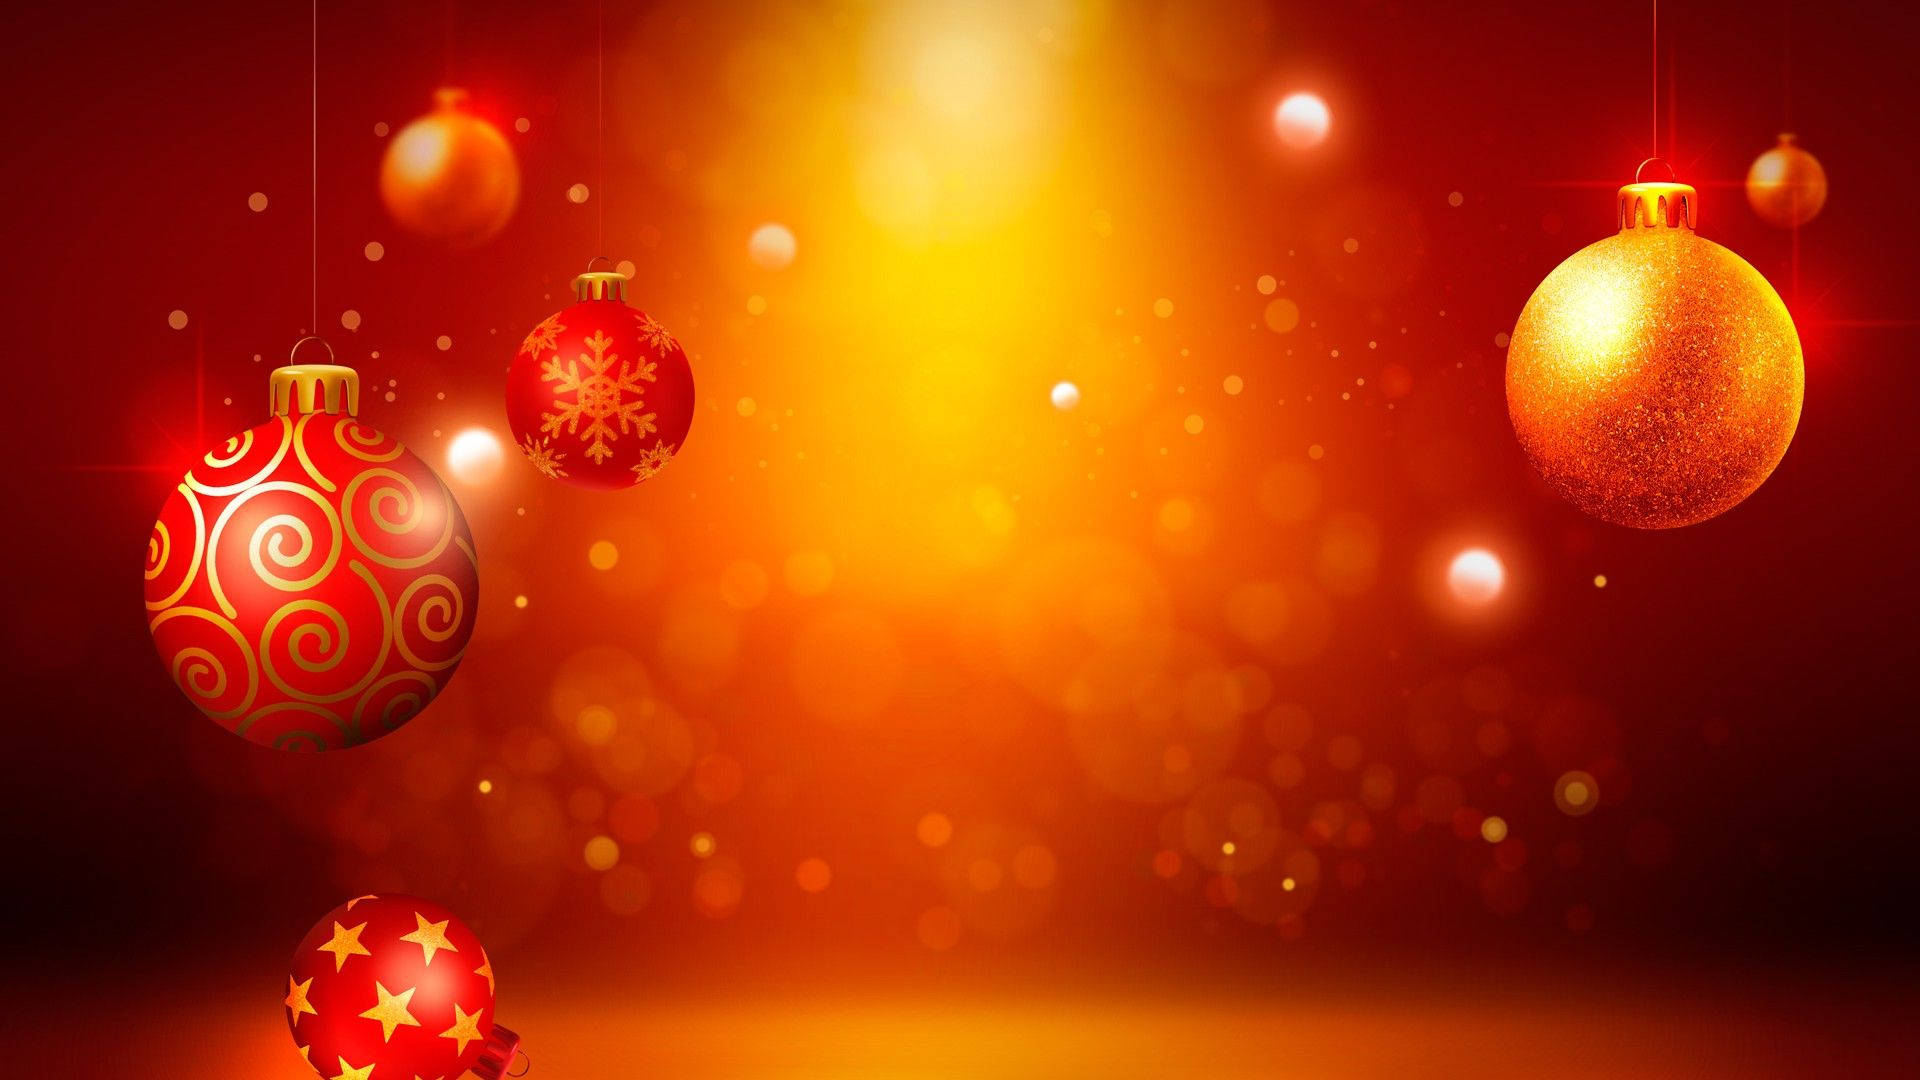 500+] Christmas Background s 